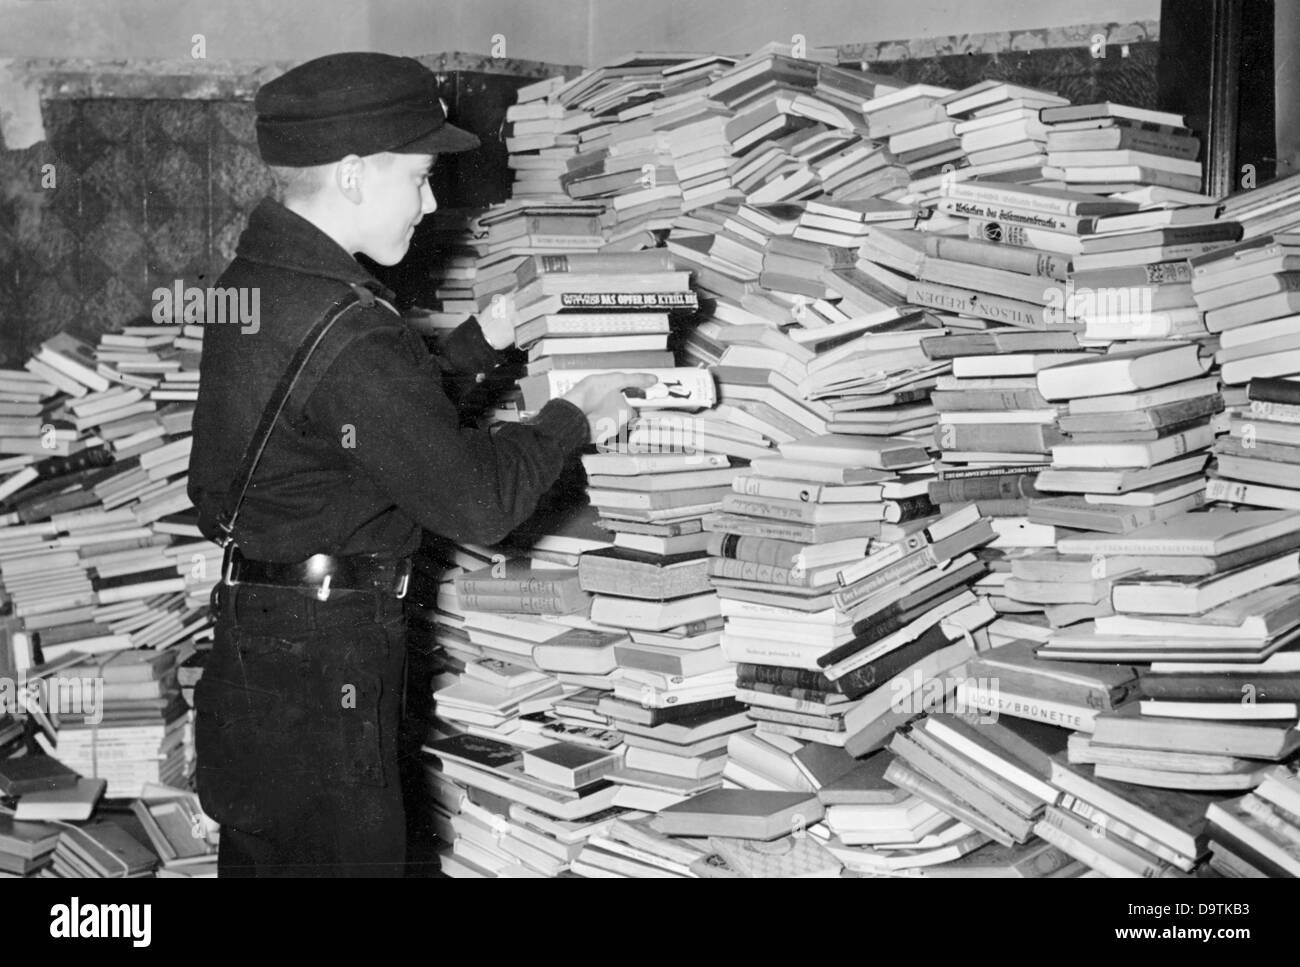 Book donations for soldiers are pictured on the Eastern Front - the Nazi Propaganda! on the back of the image is dated 1 November 1941: 'Book donations for our brave soldiers. In the Reich capital, a voluntary book donation for our brave soldiers was carried out on Sunday (2.11.41), and, as it was expected, a good result was achieved. Many soldiers will be especially happy! A part of the book donations, which this Pimpf has collected diligently going upstairs and downstairs.' Photo: Berliner Verlag/Archiv Stock Photo